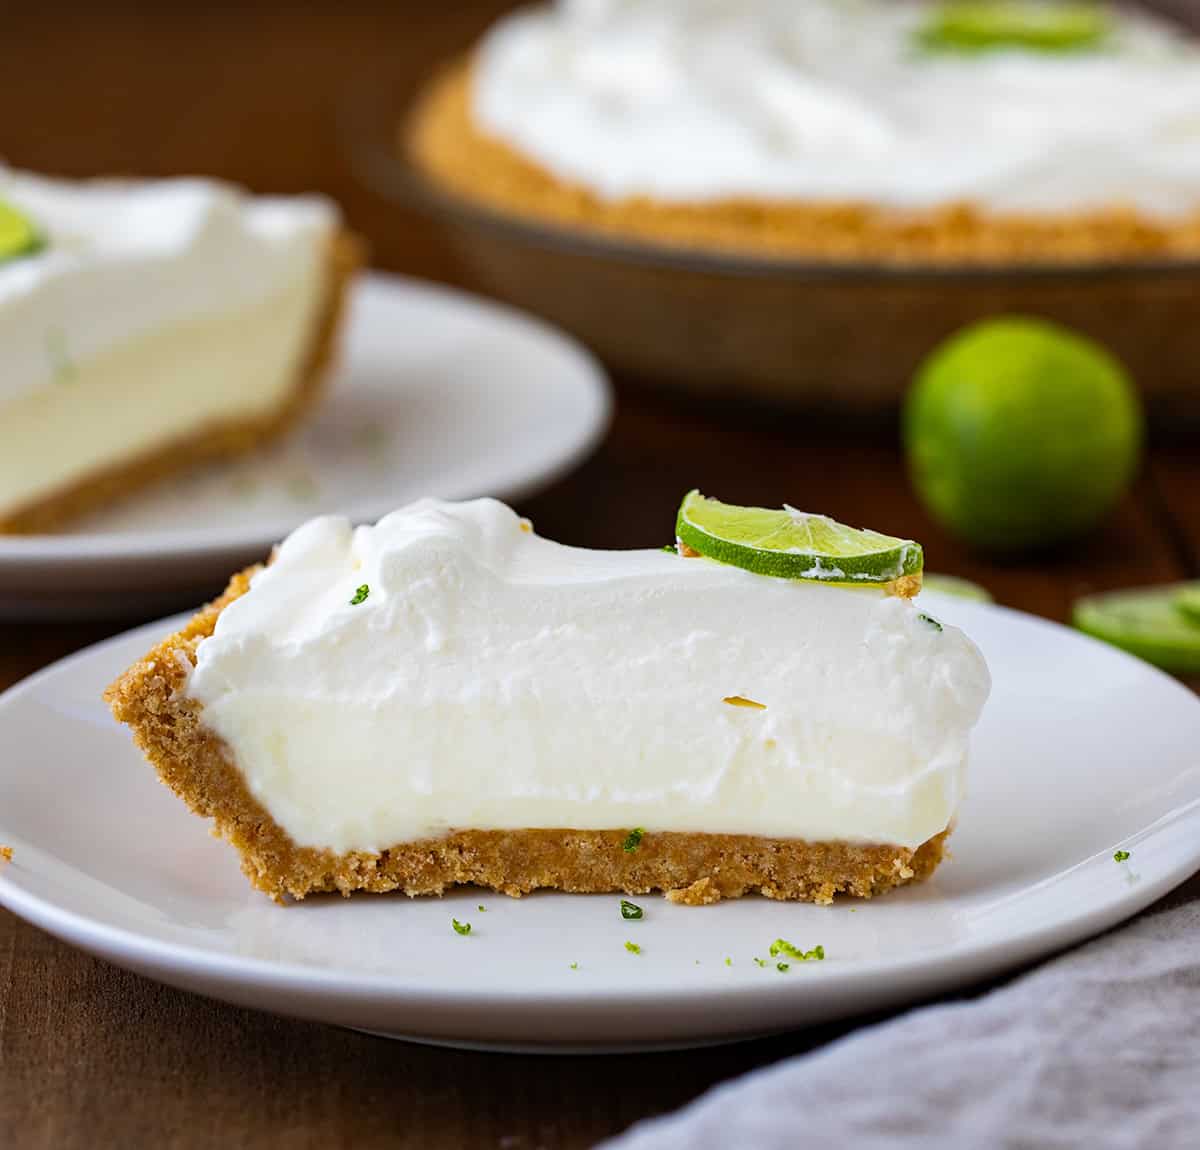 Pieces of key lime pie on white plates on a dark wooden table.